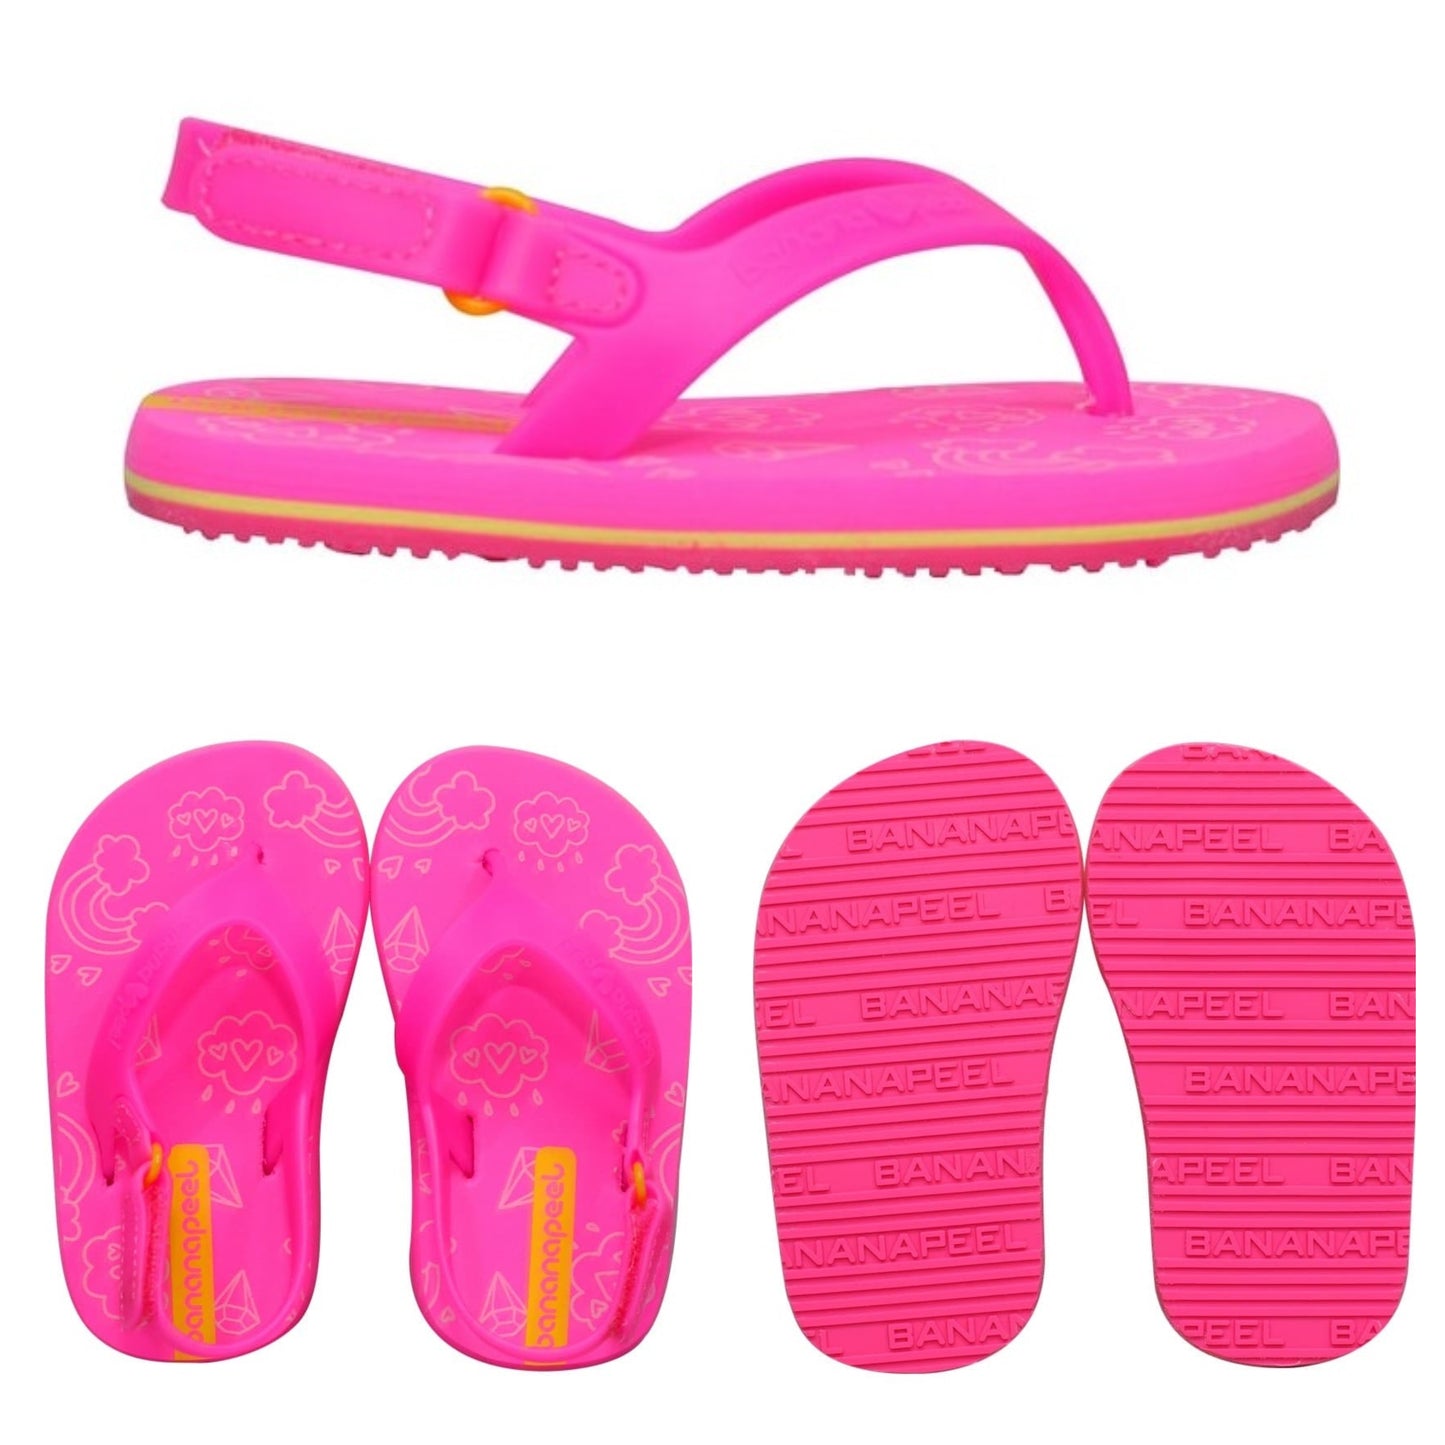 Banana Peel Slippers for Toddlers - Little Princess Set Sugar and Spice Neon Pink - MYSTYLEMYCLOTHING